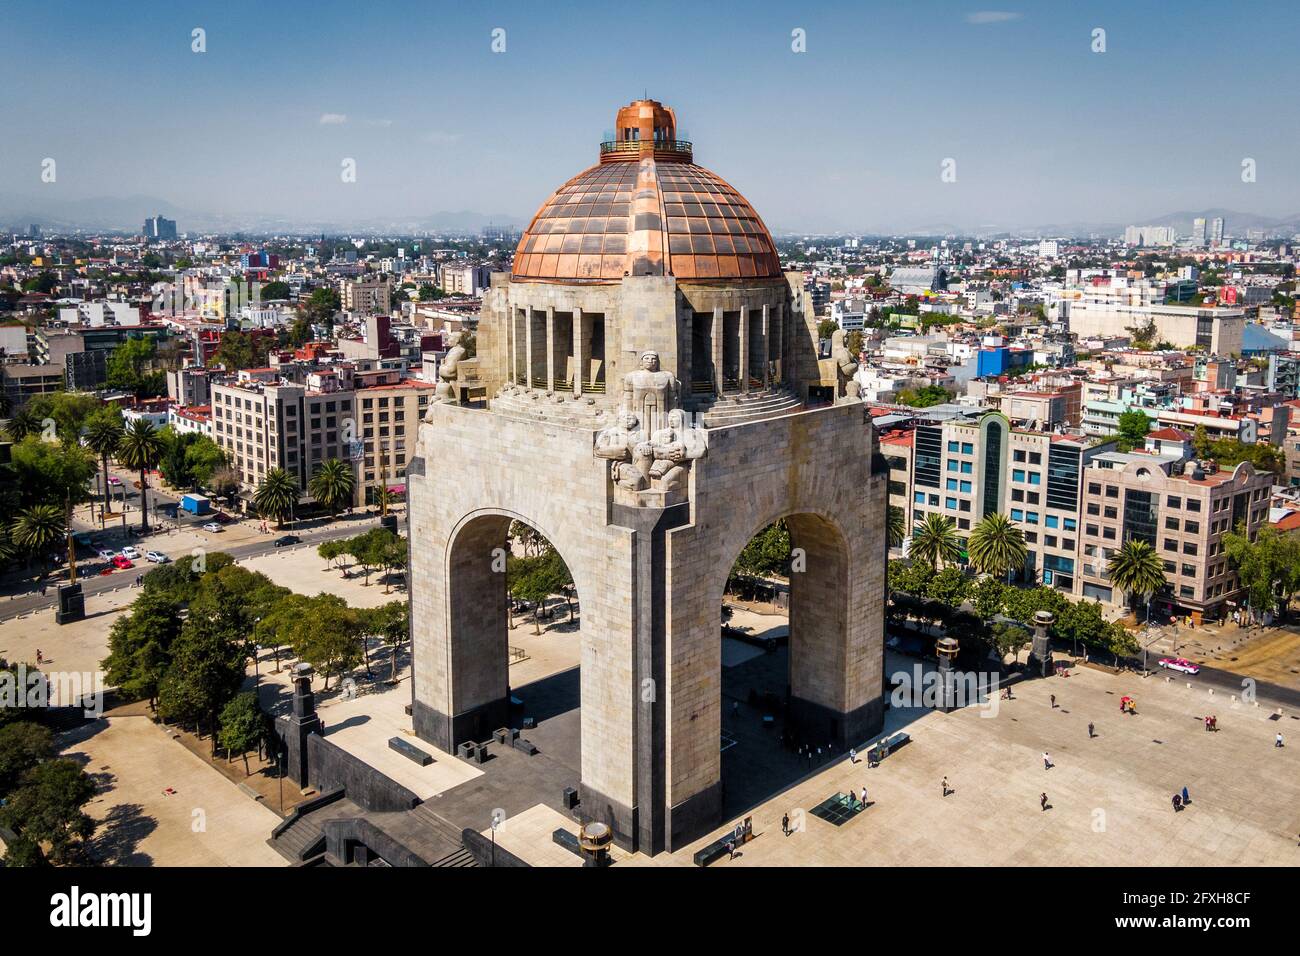 Aerial view of cityscape including architectural landmark Monument to the Revolution located at Republic Square in Mexico City, Mexico. Stock Photo